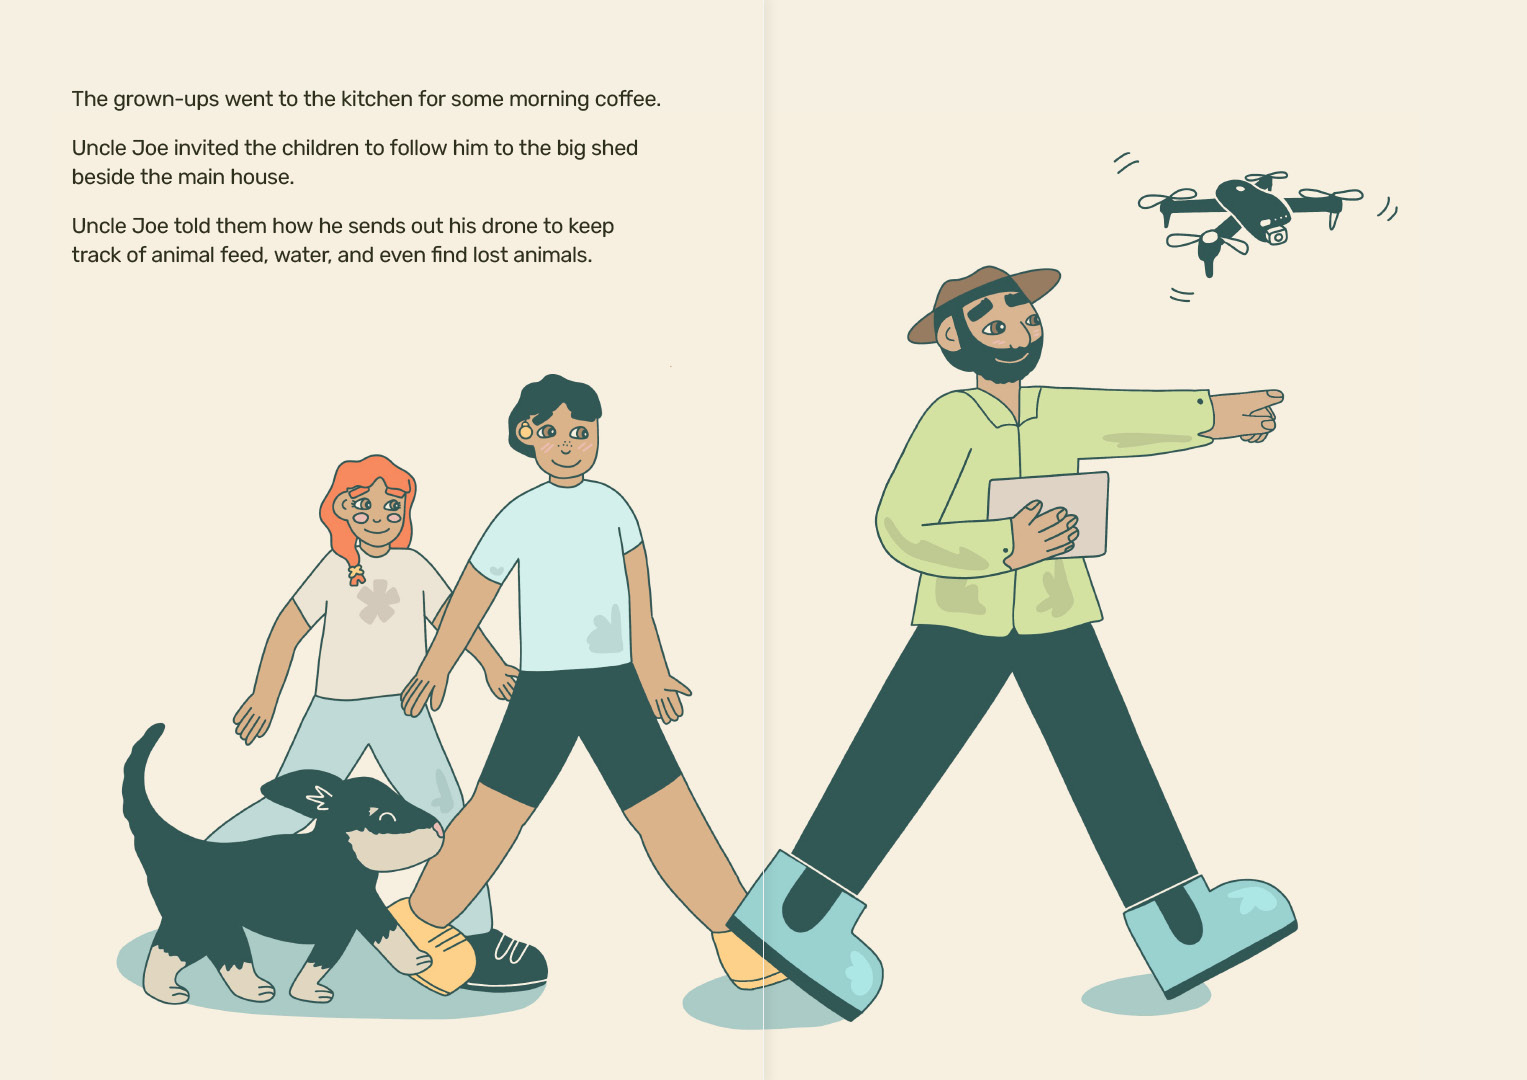 Illustrated spread from eReader picturing a Farmer with a drone leading two children and a dog.